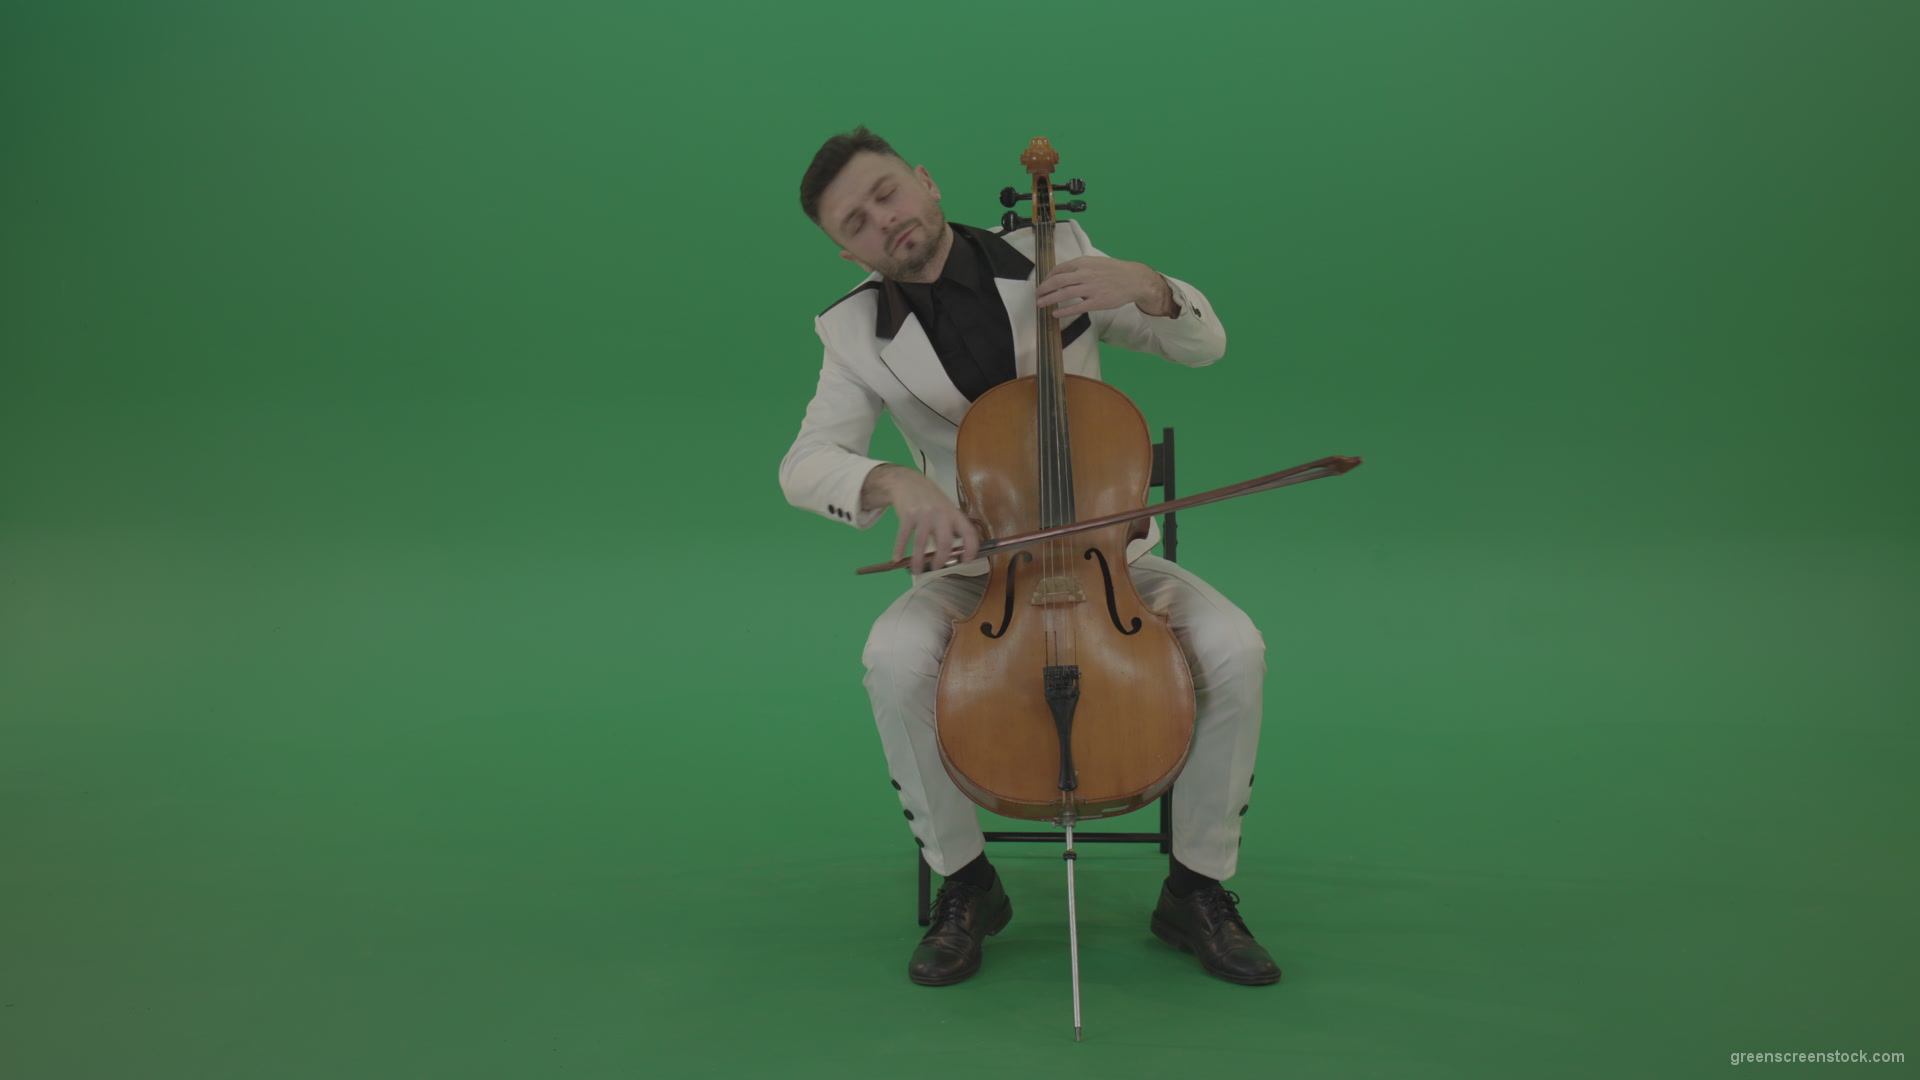 Classic-orchestra-man-in-white-wear-play-violoncello-cello-strings-music-instrument-isolated-on-green-screen_002 Green Screen Stock